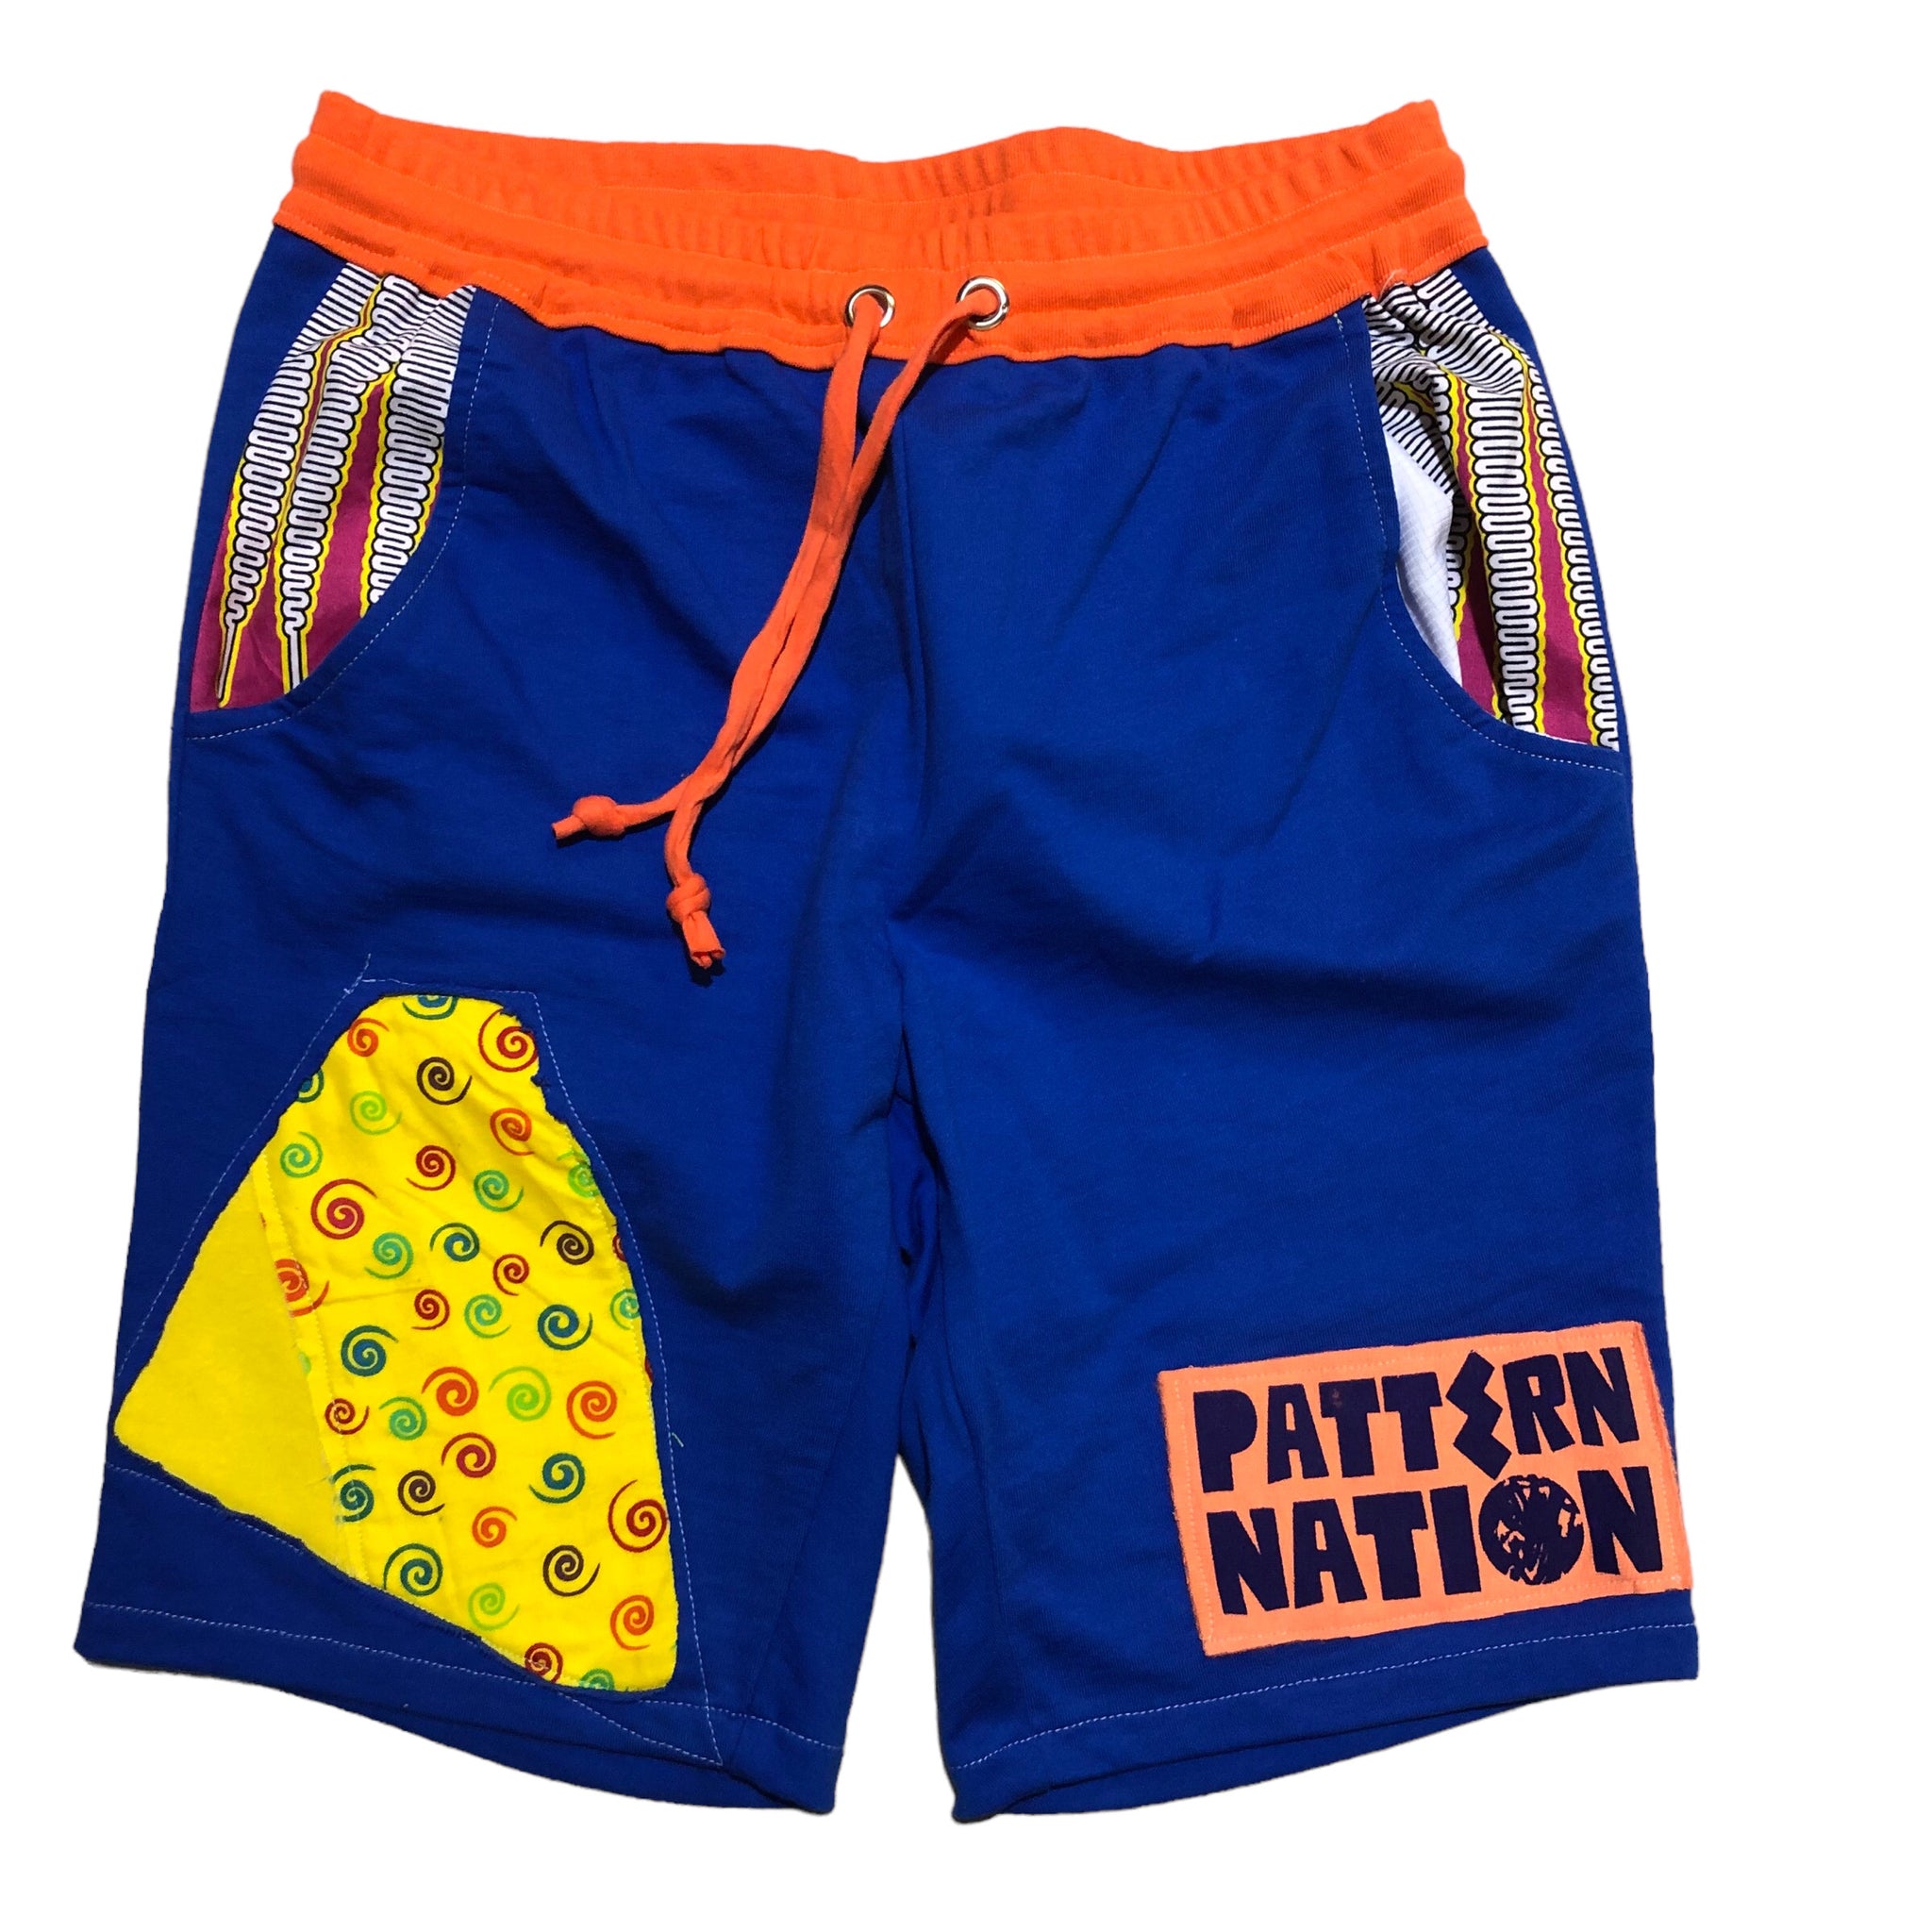 Hand Patchwork Shorts by Pattern Nation